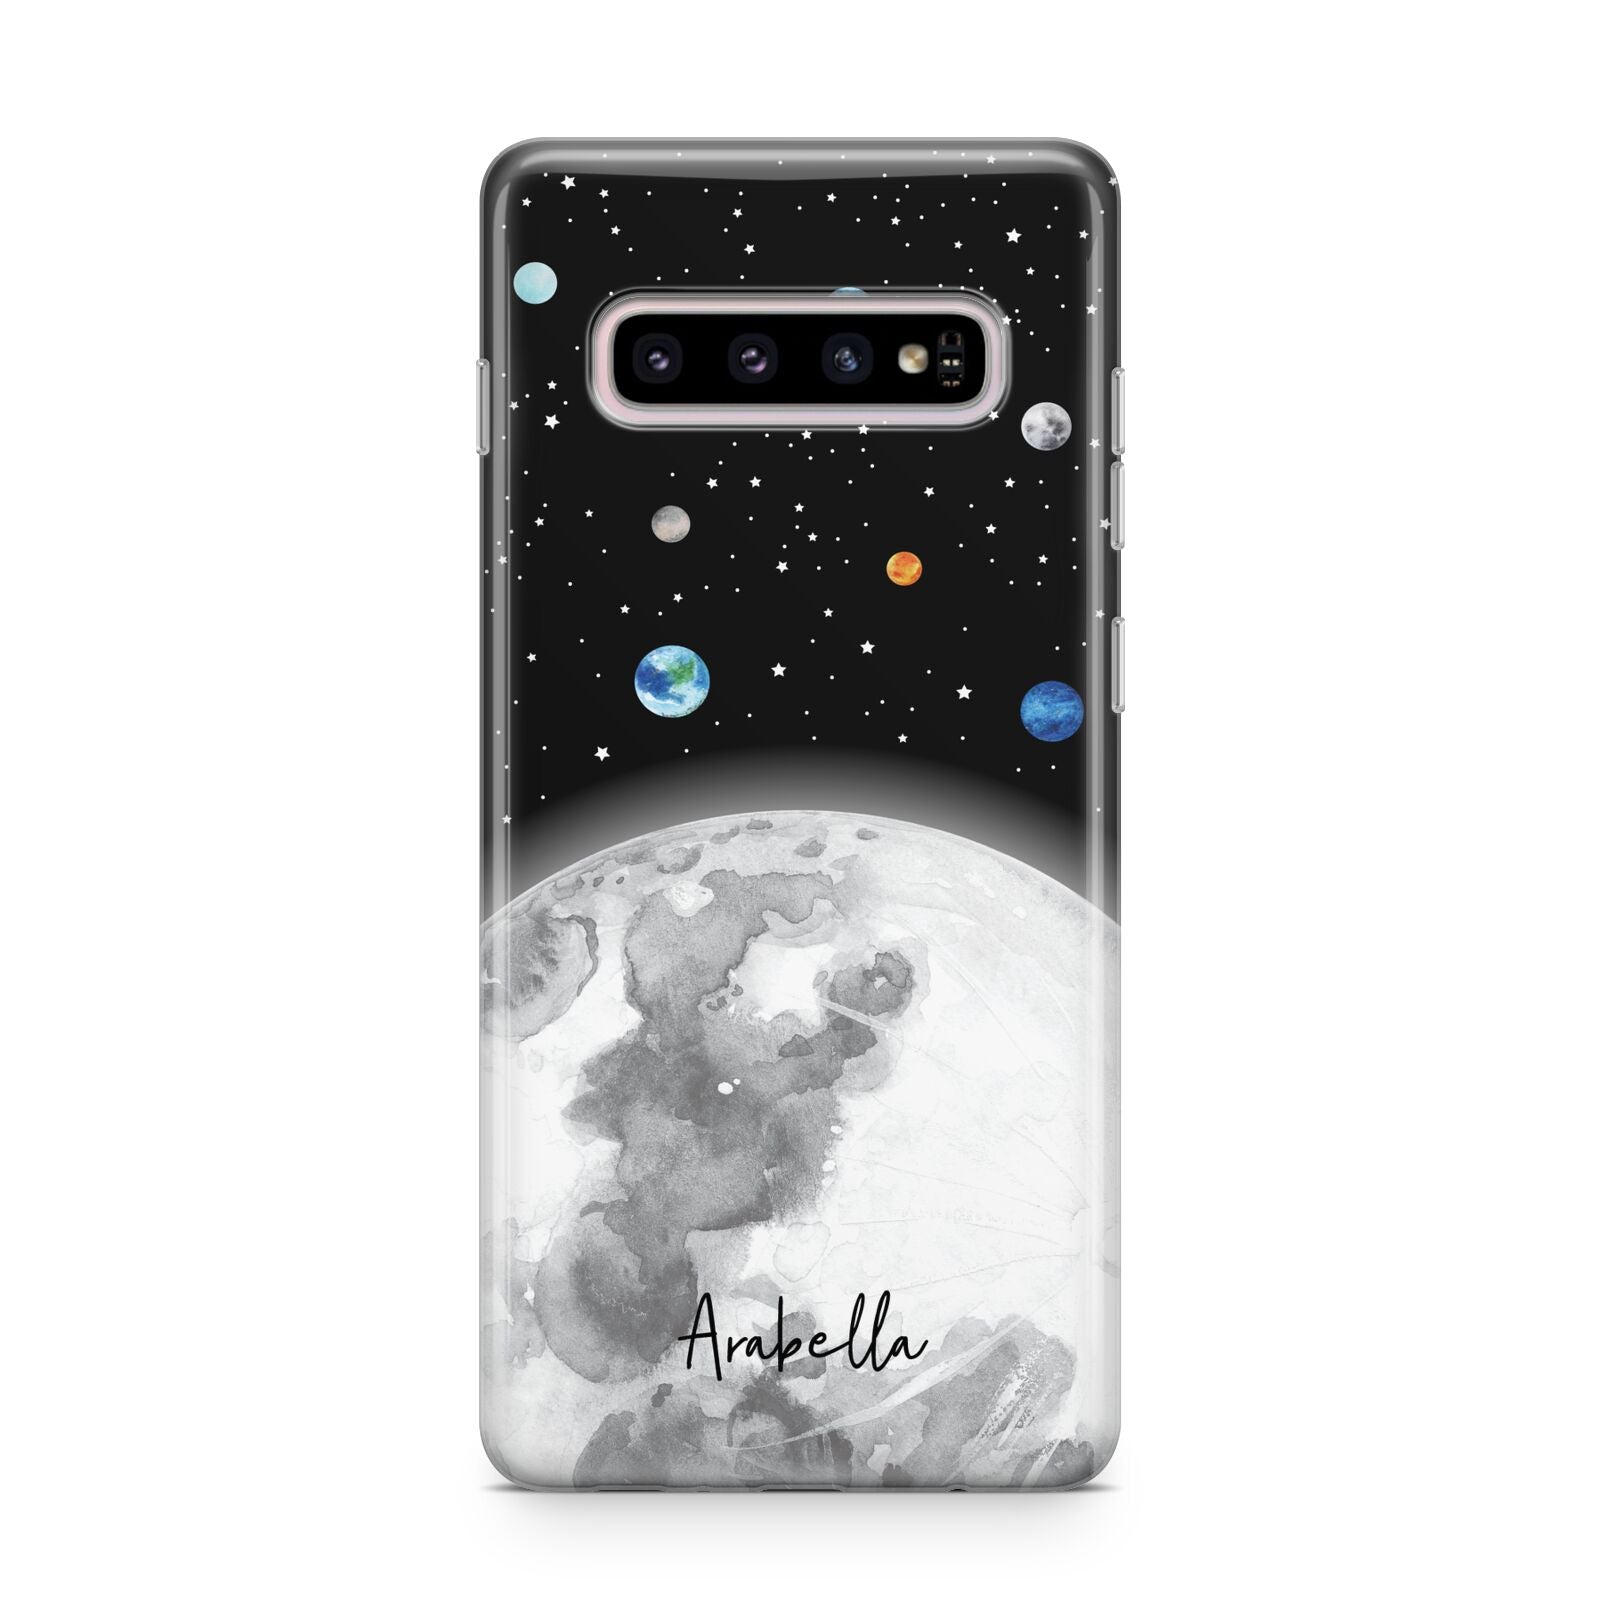 Watercolour Close up Moon with Name Samsung Galaxy S10 Plus Case